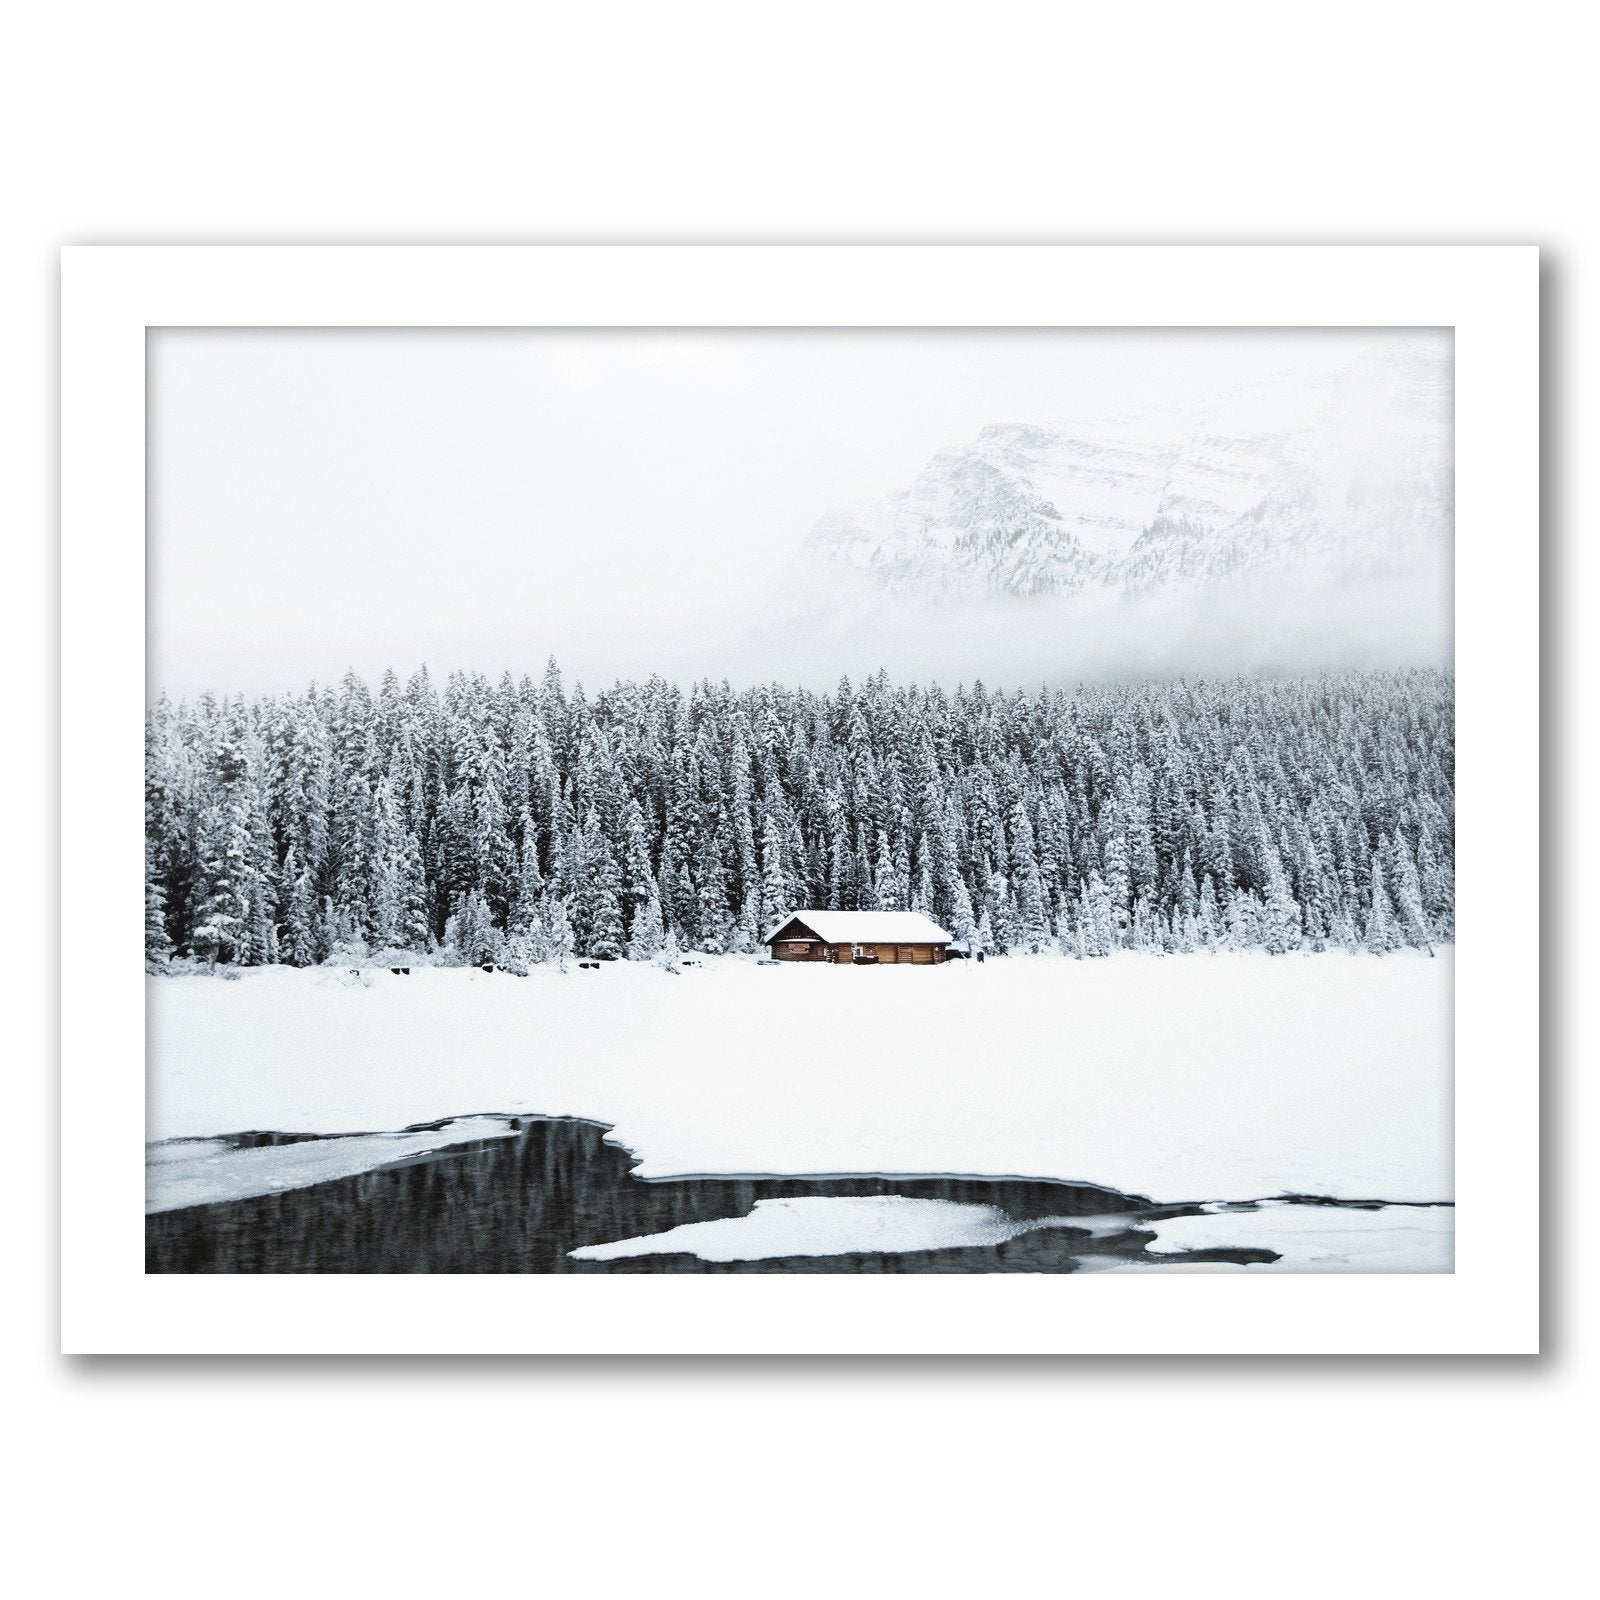 Cabin  by Dallas Drotz - Framed Print - Americanflat